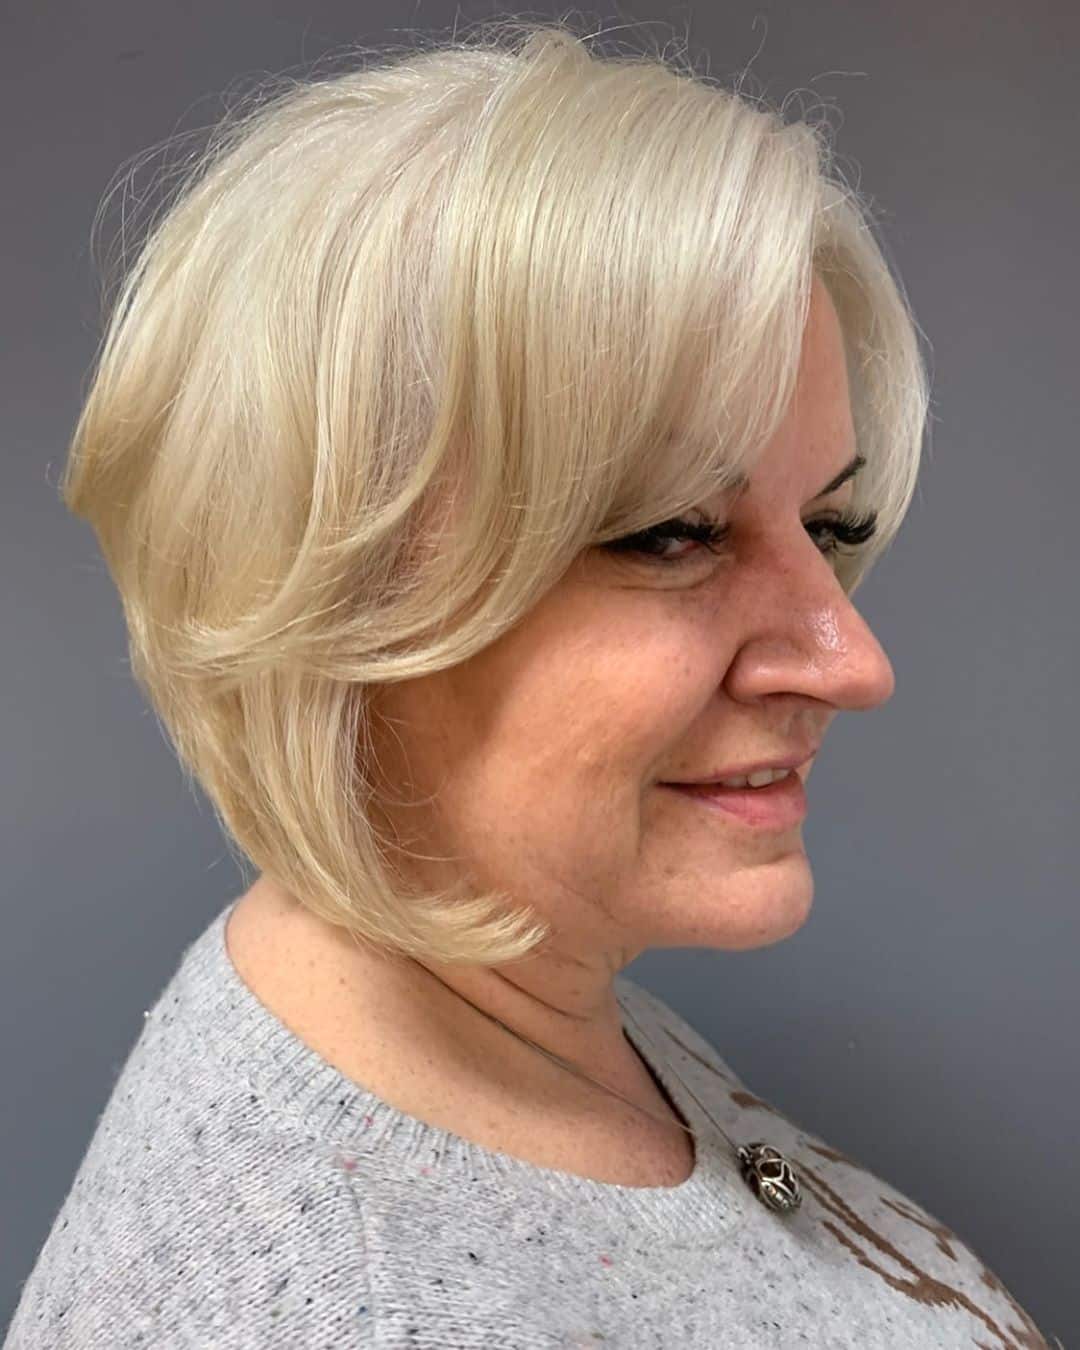 15 short hairstyles for weight loss for women over 50 with a round face